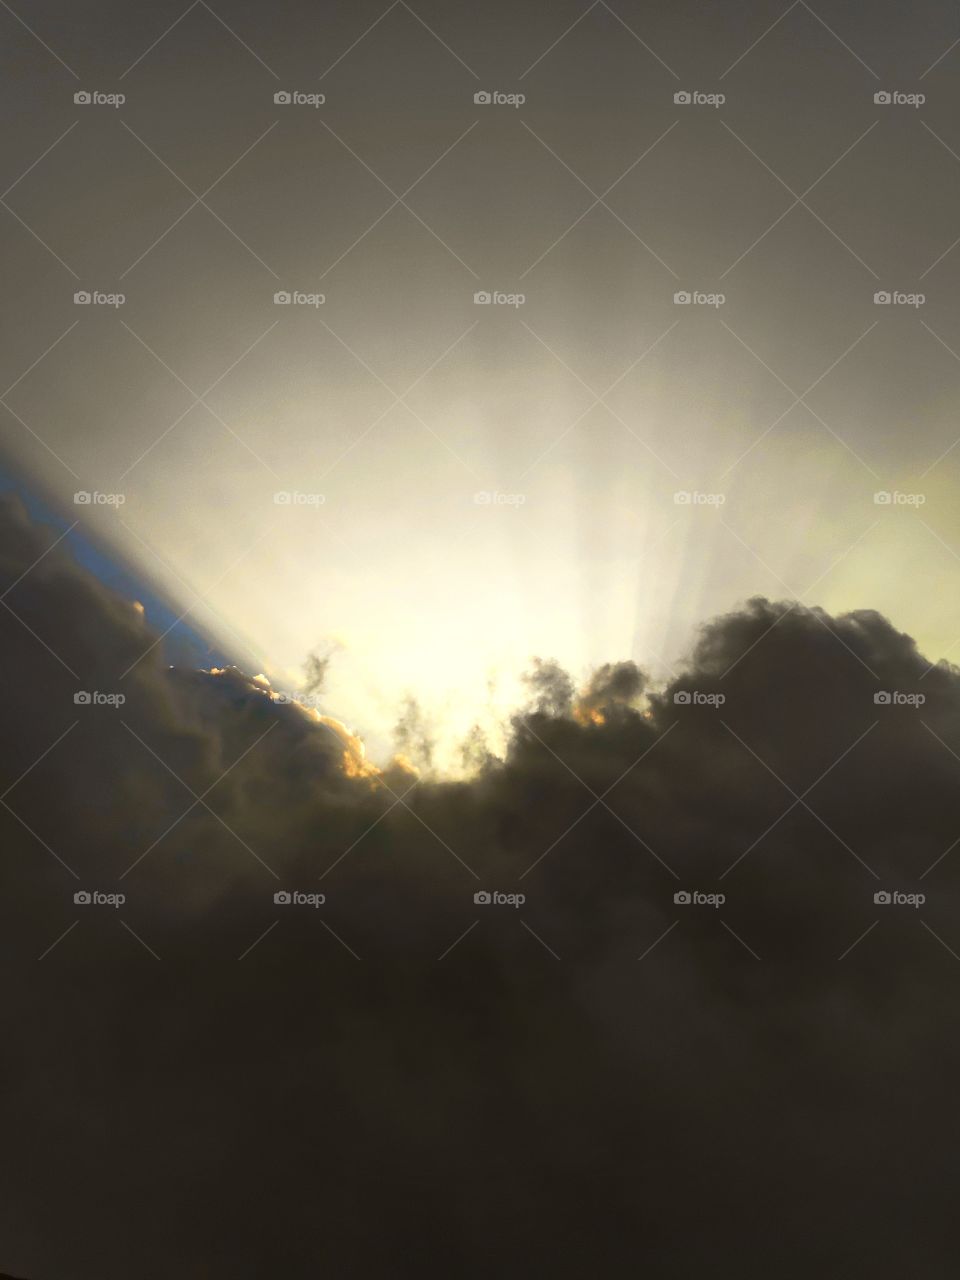 "Crepuscular" are rays of sunlight that appear to radiate from the point in the sky where the Sun is located, shining through openings in clouds or between other objects such as mountains."